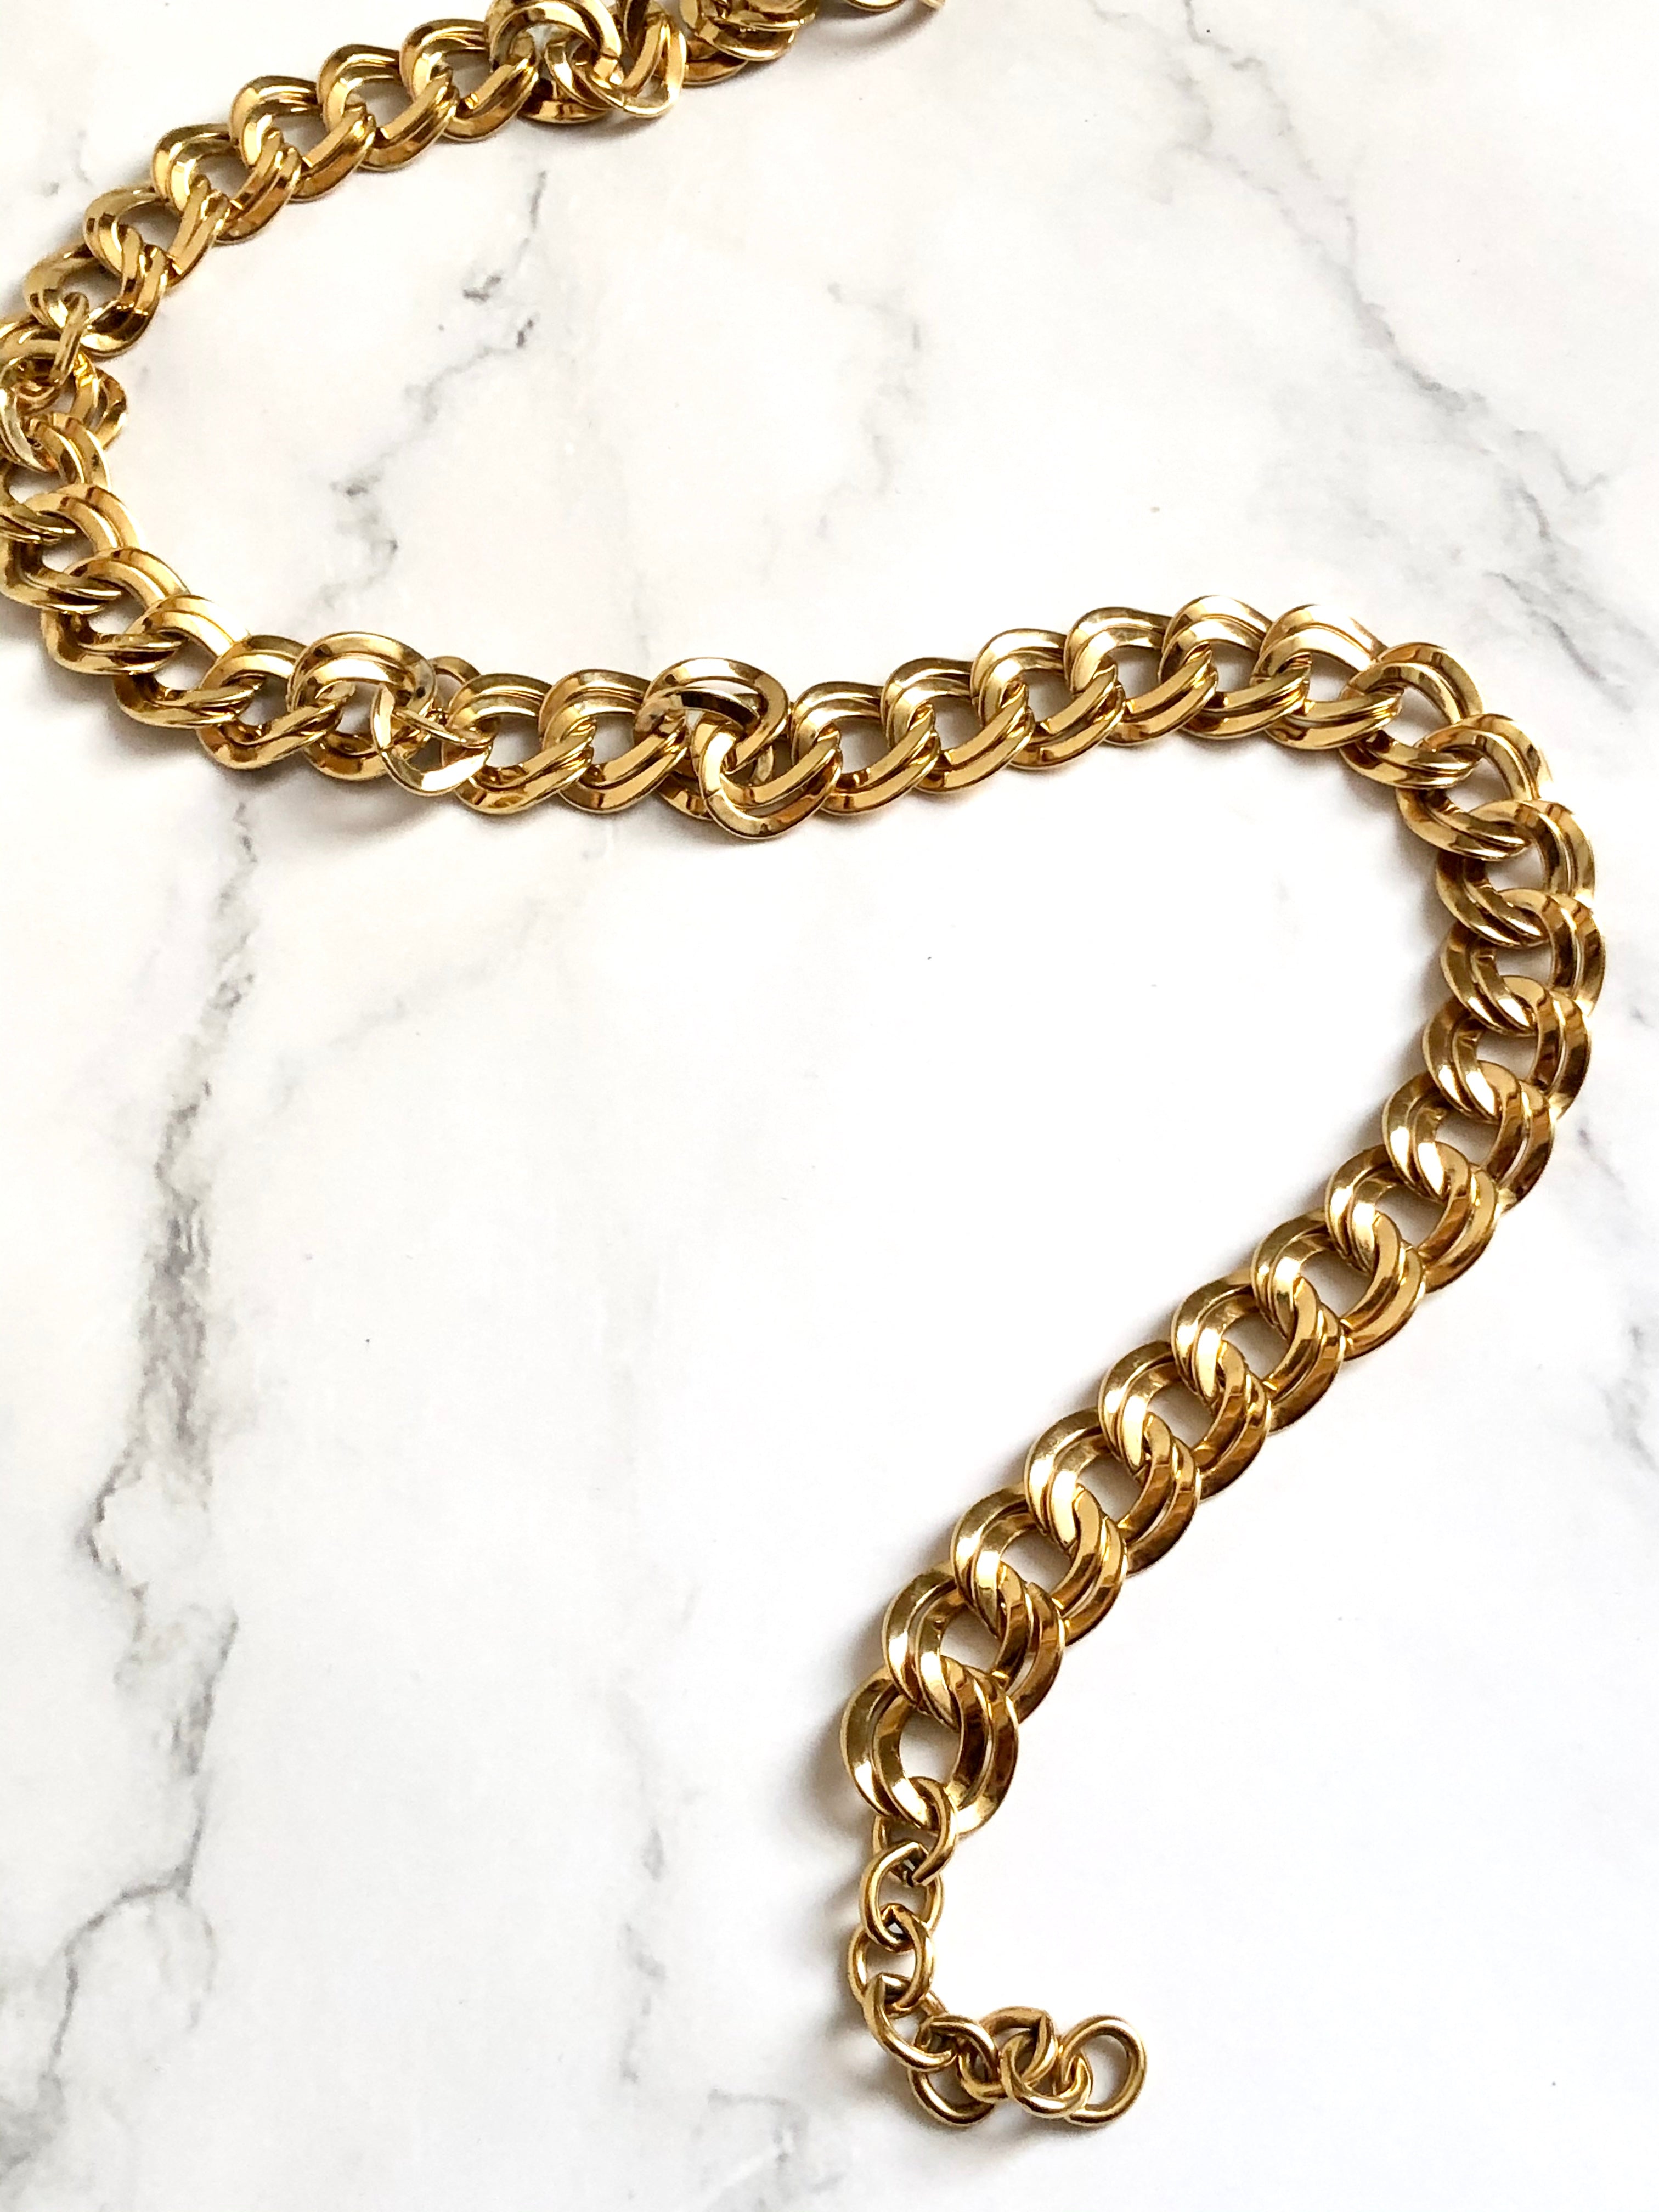 Monet Pre-Owned Pre-Owned Jewelry for Women - Shop on FARFETCH